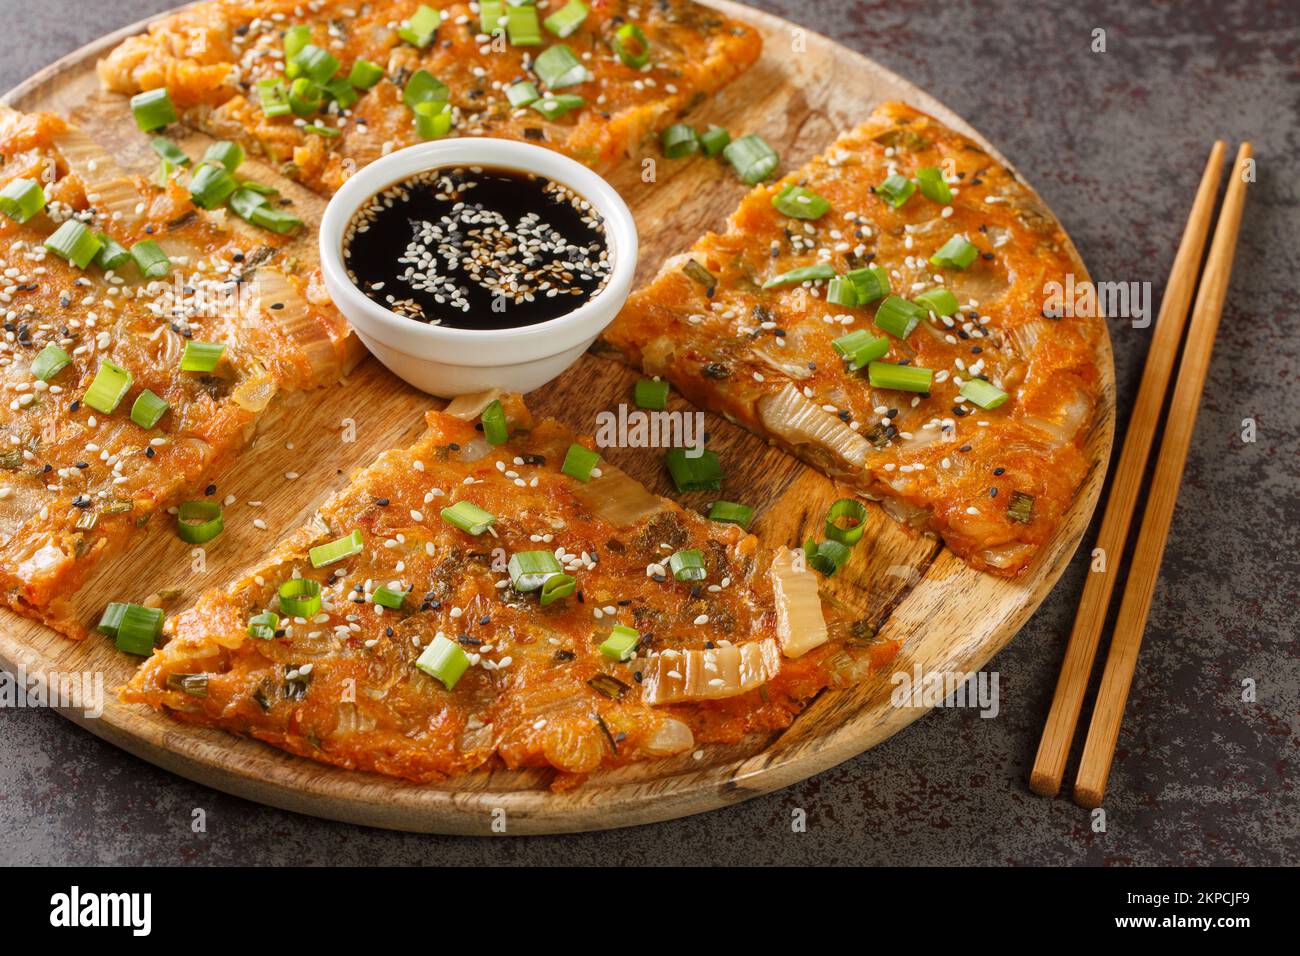 Kimchi-buchimgae or kimchijeon made with sliced kimchi, flour batter and sometimes other vegetables closeup on the wooden board on the table. Horizont Stock Photo